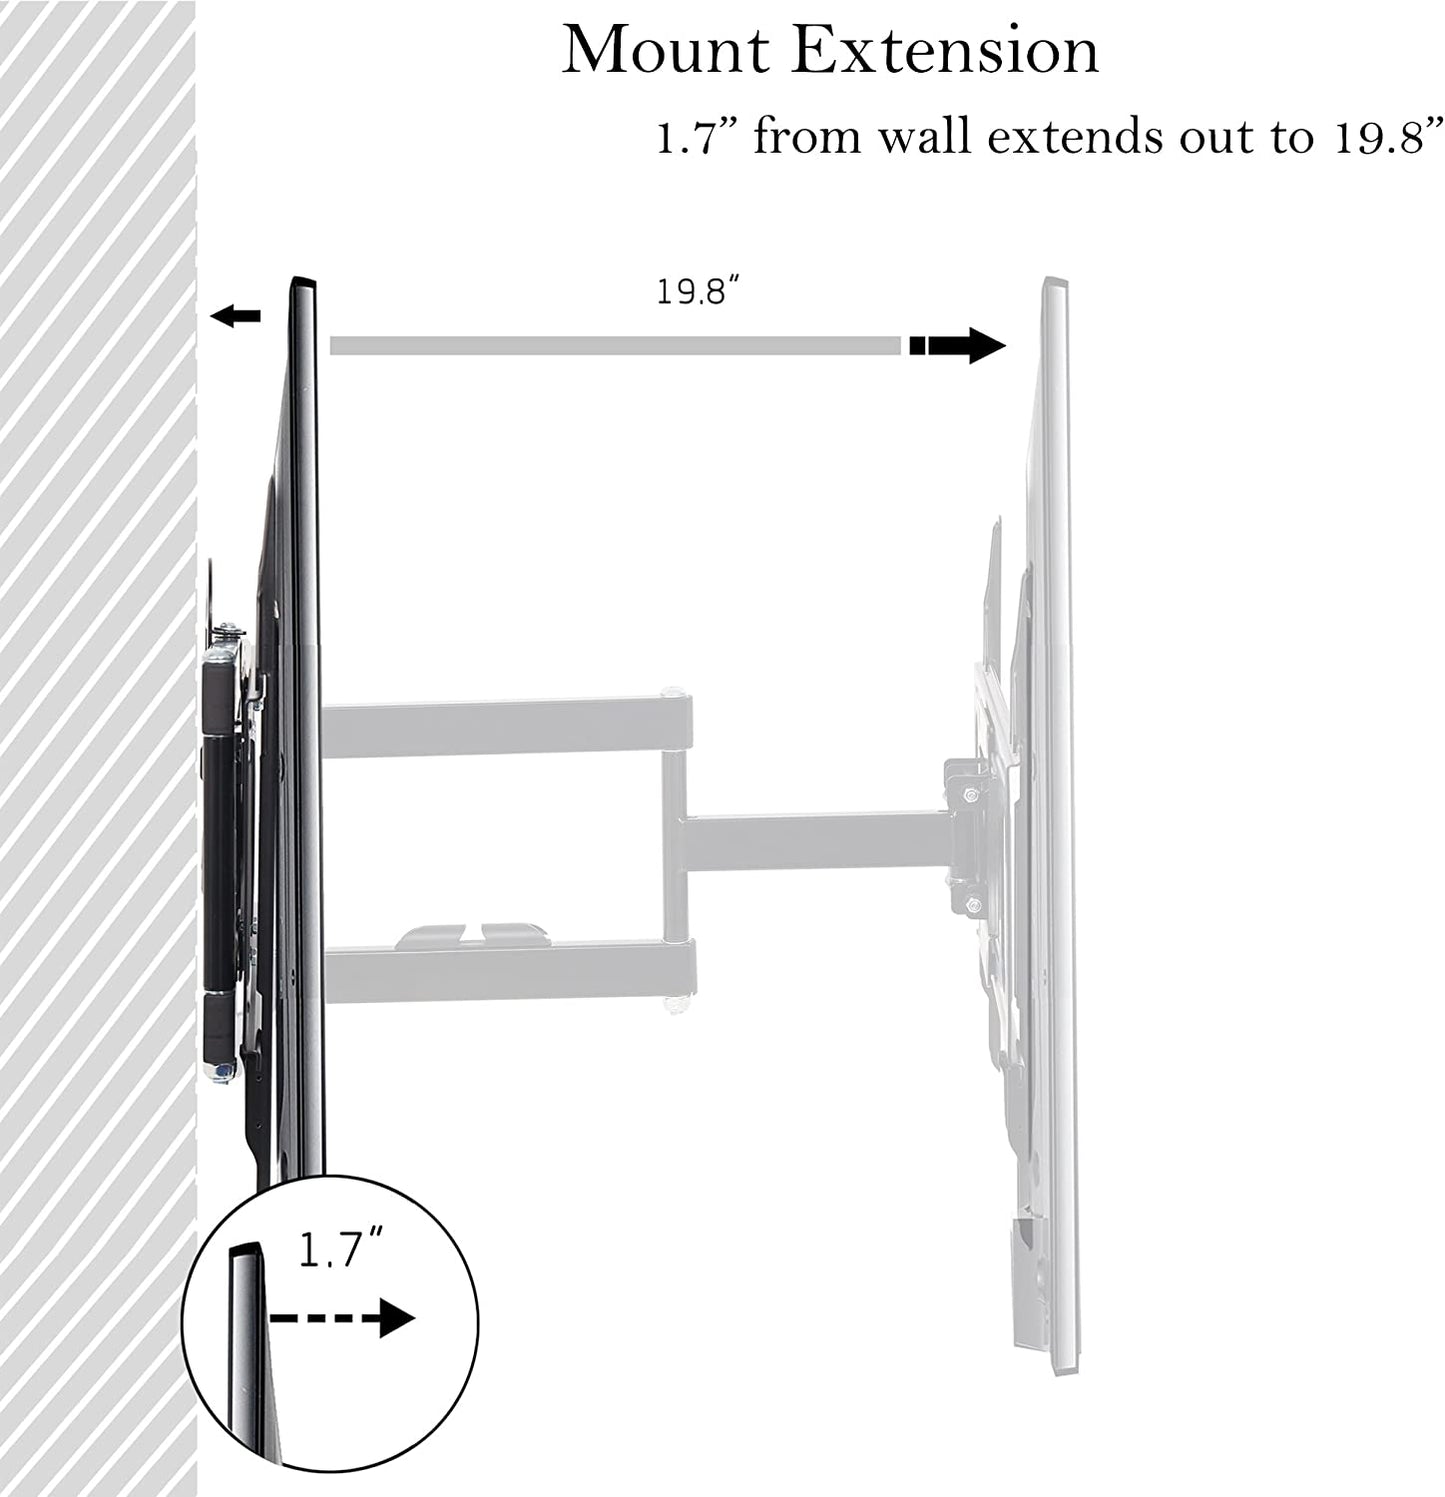 Full Motion TV Wall Mount for 23”-55” Flat Screen TVs, Monitor with Swivel Articulating Arms, up to VESA 400x400mm and 66 lbs